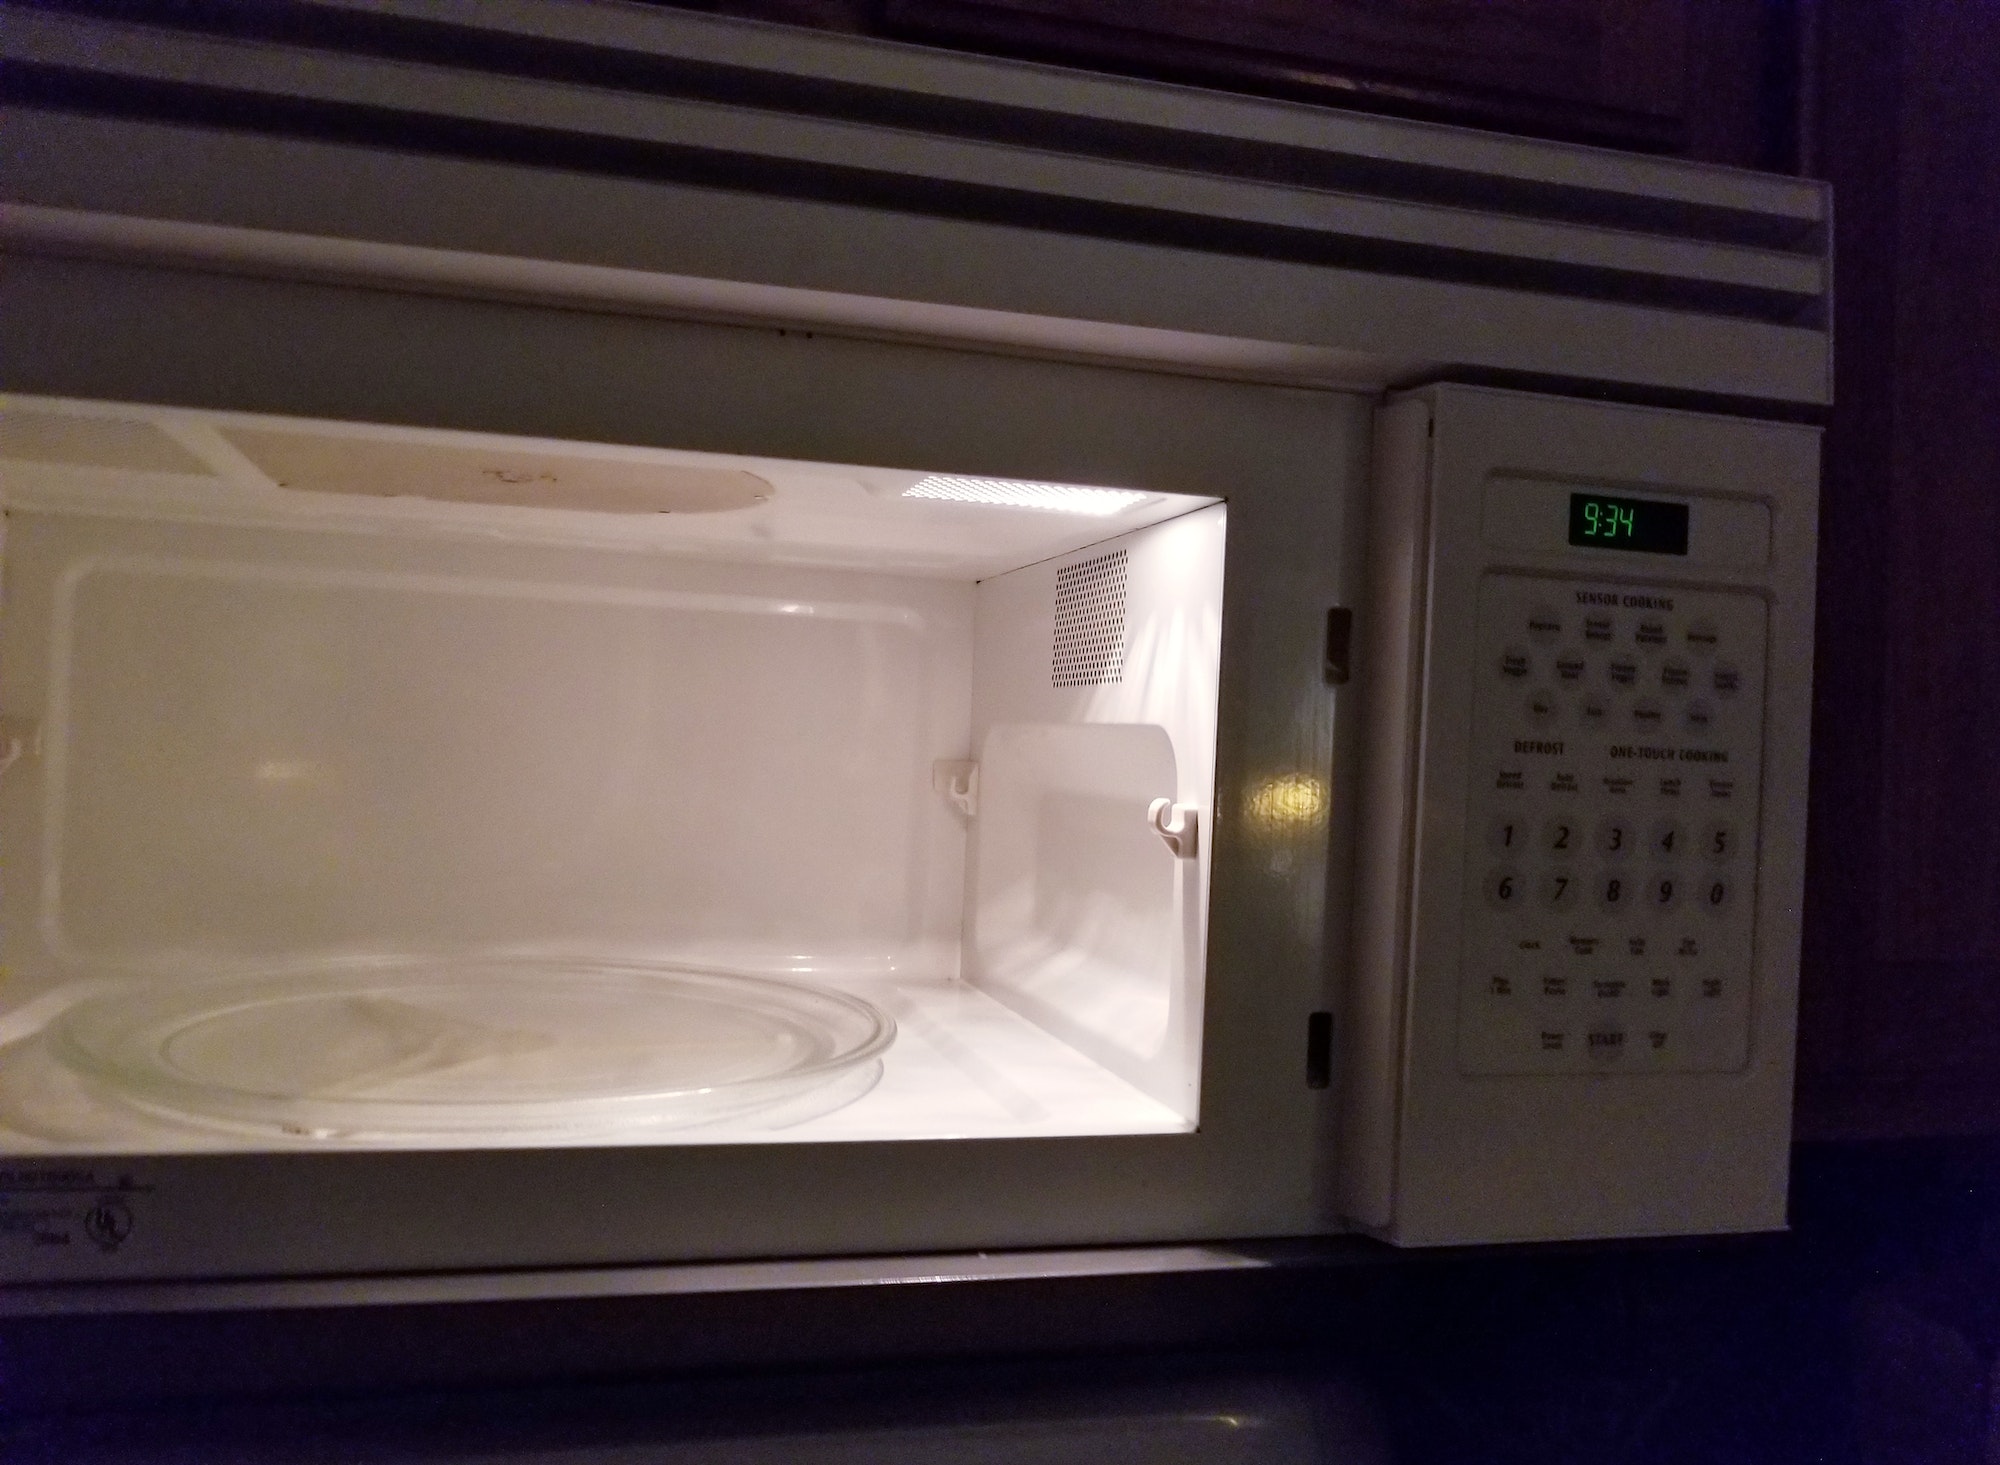 Microwave Not Heating Food but Still Runs? Here’s How to Fix It!